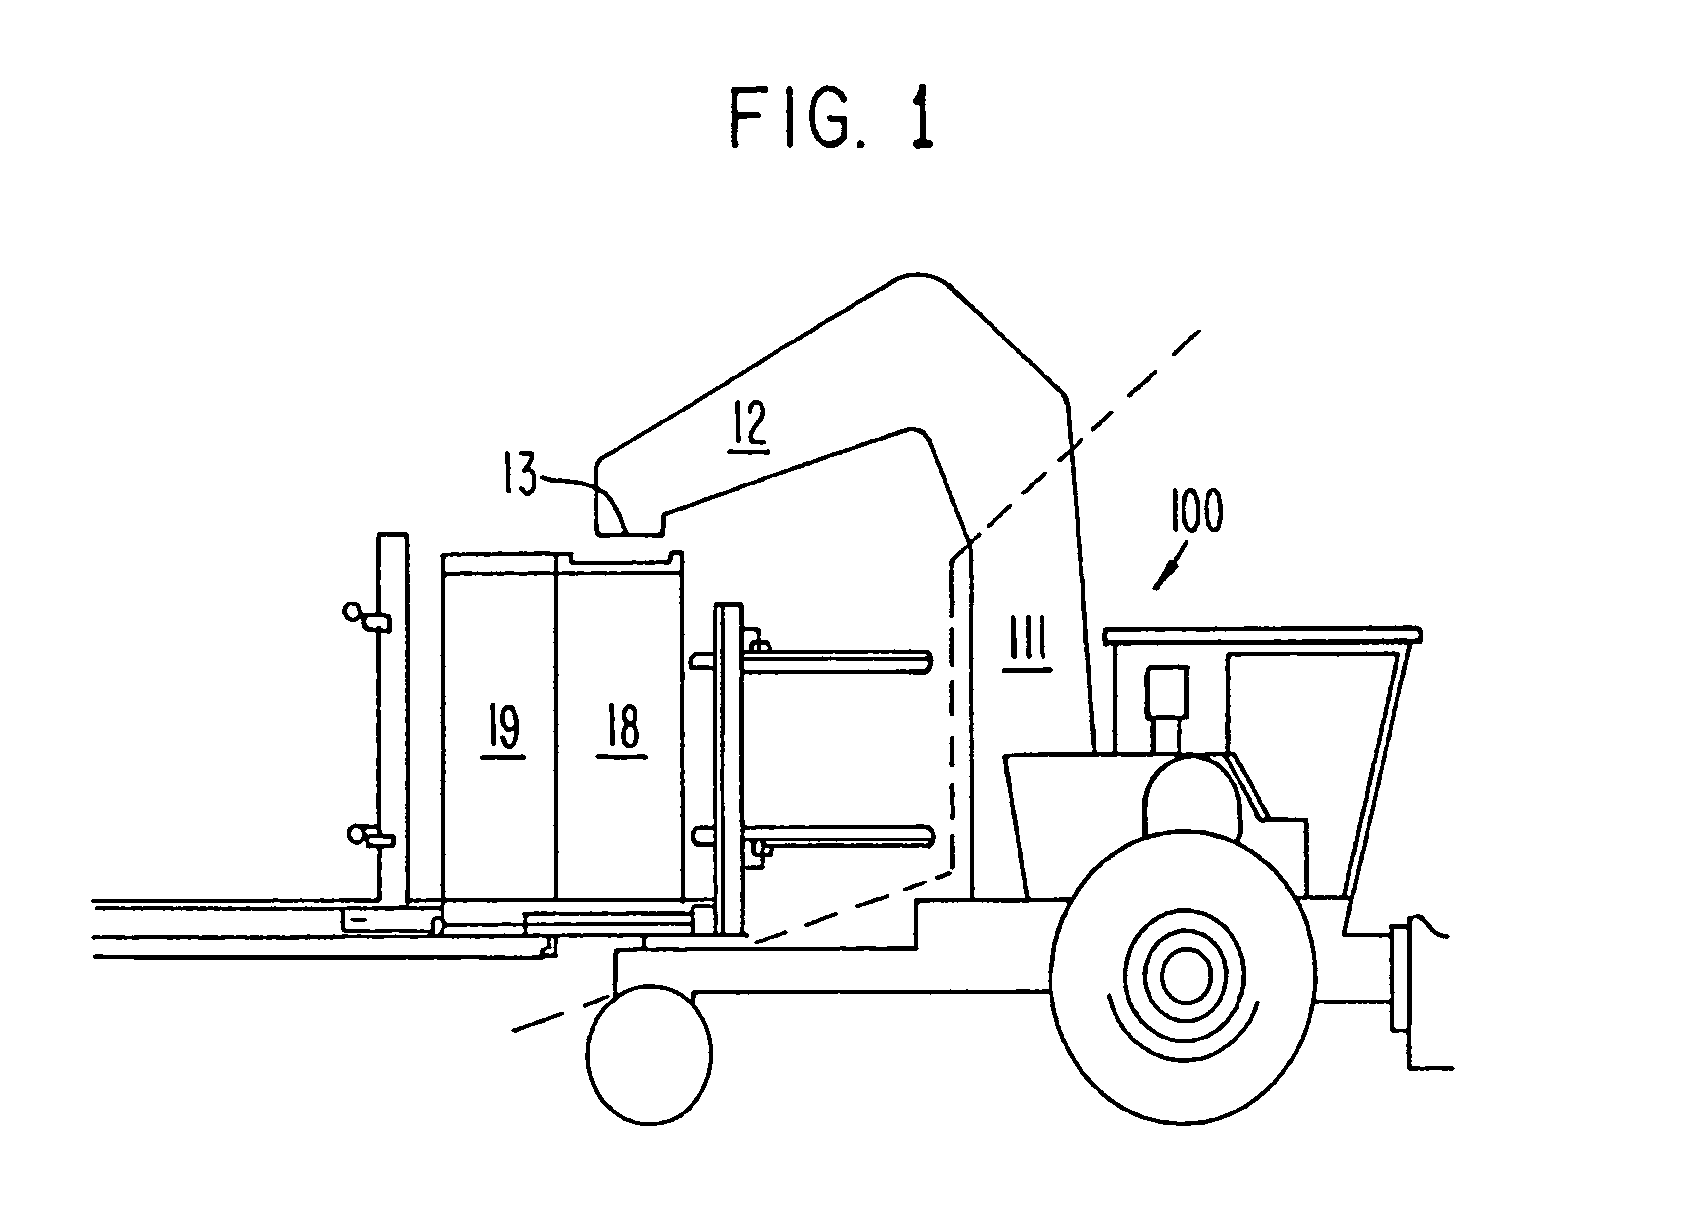 Method and apparatus for forming modules from harvested crops